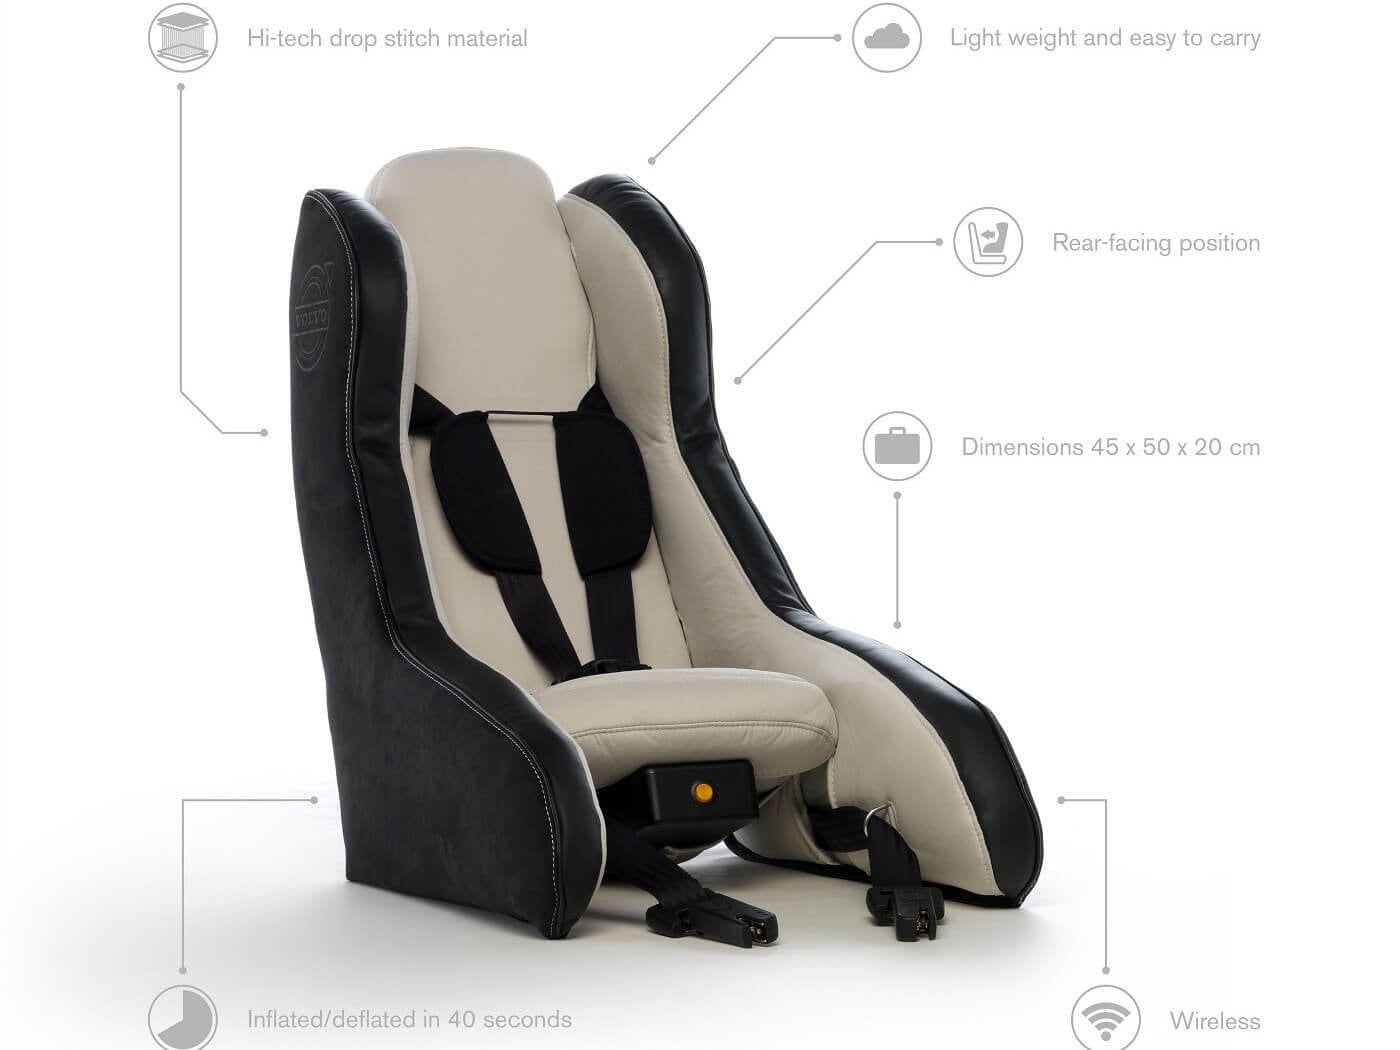 The world first inflatable child seat concept by Volvo Cars.